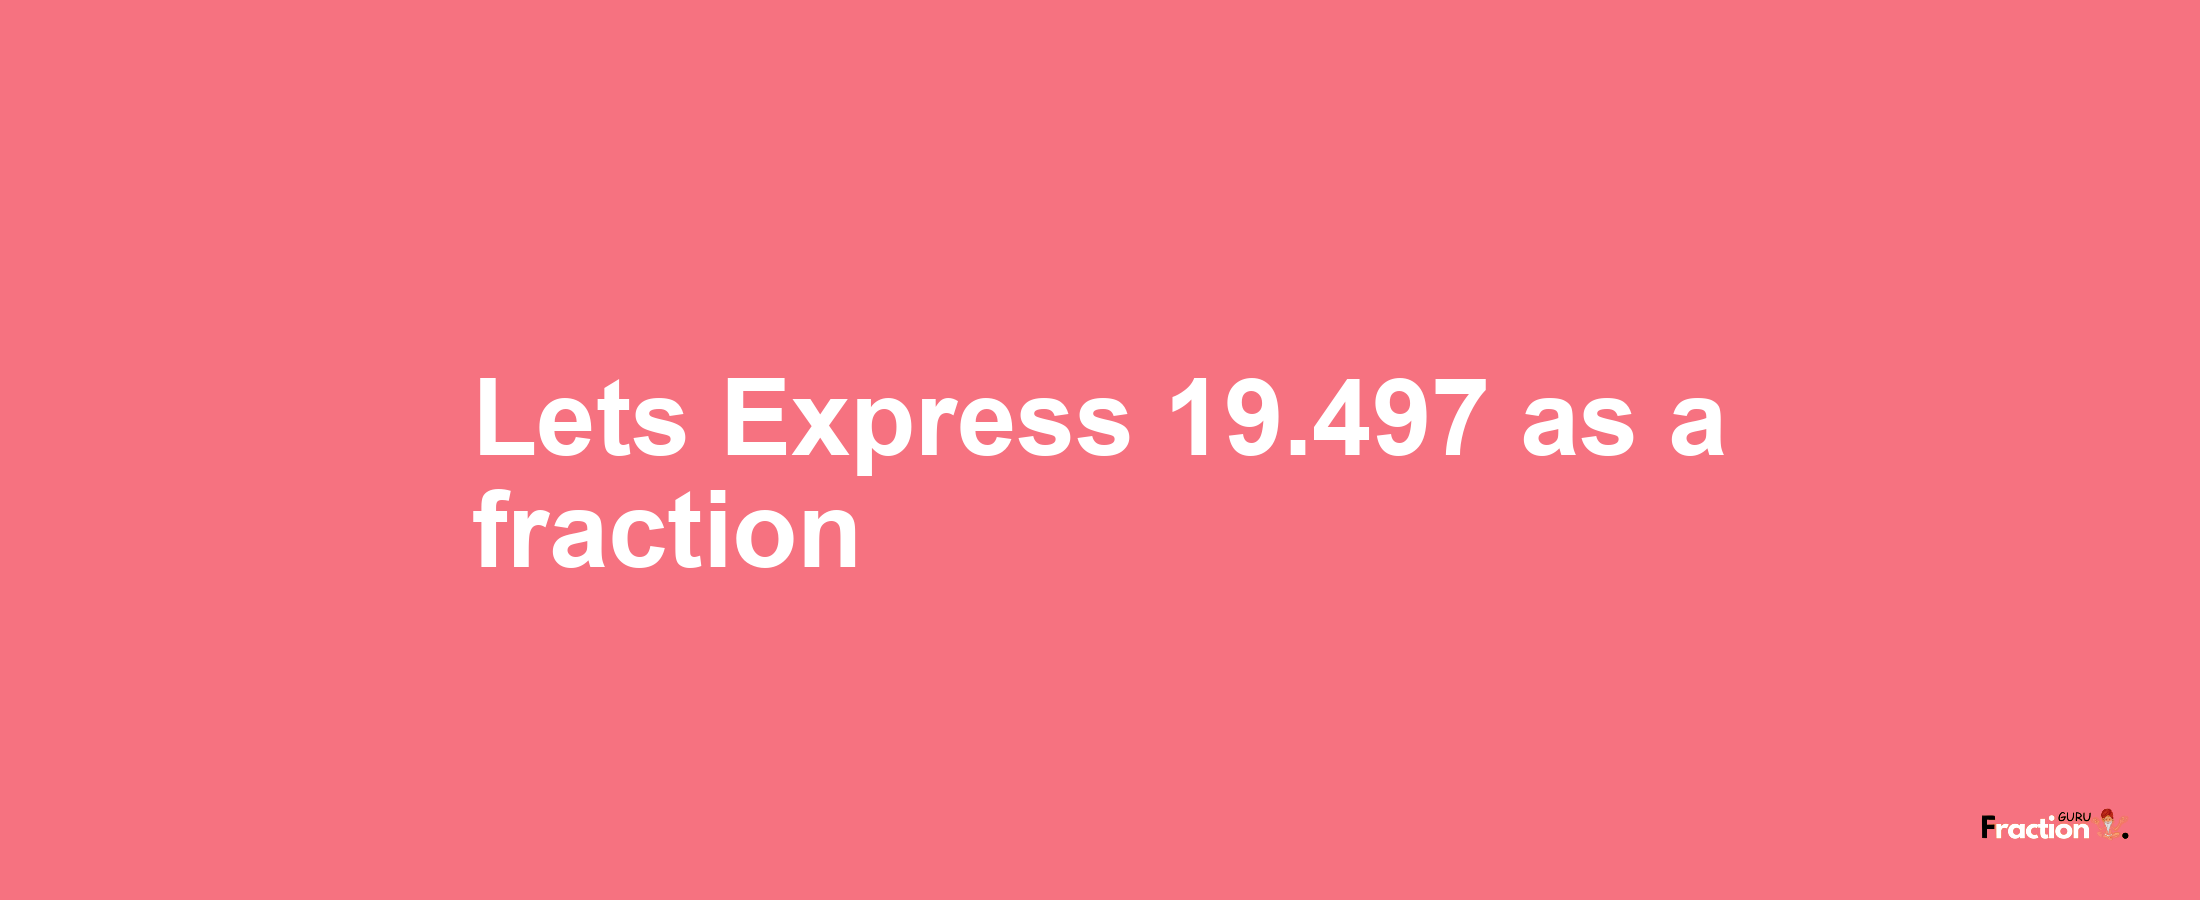 Lets Express 19.497 as afraction